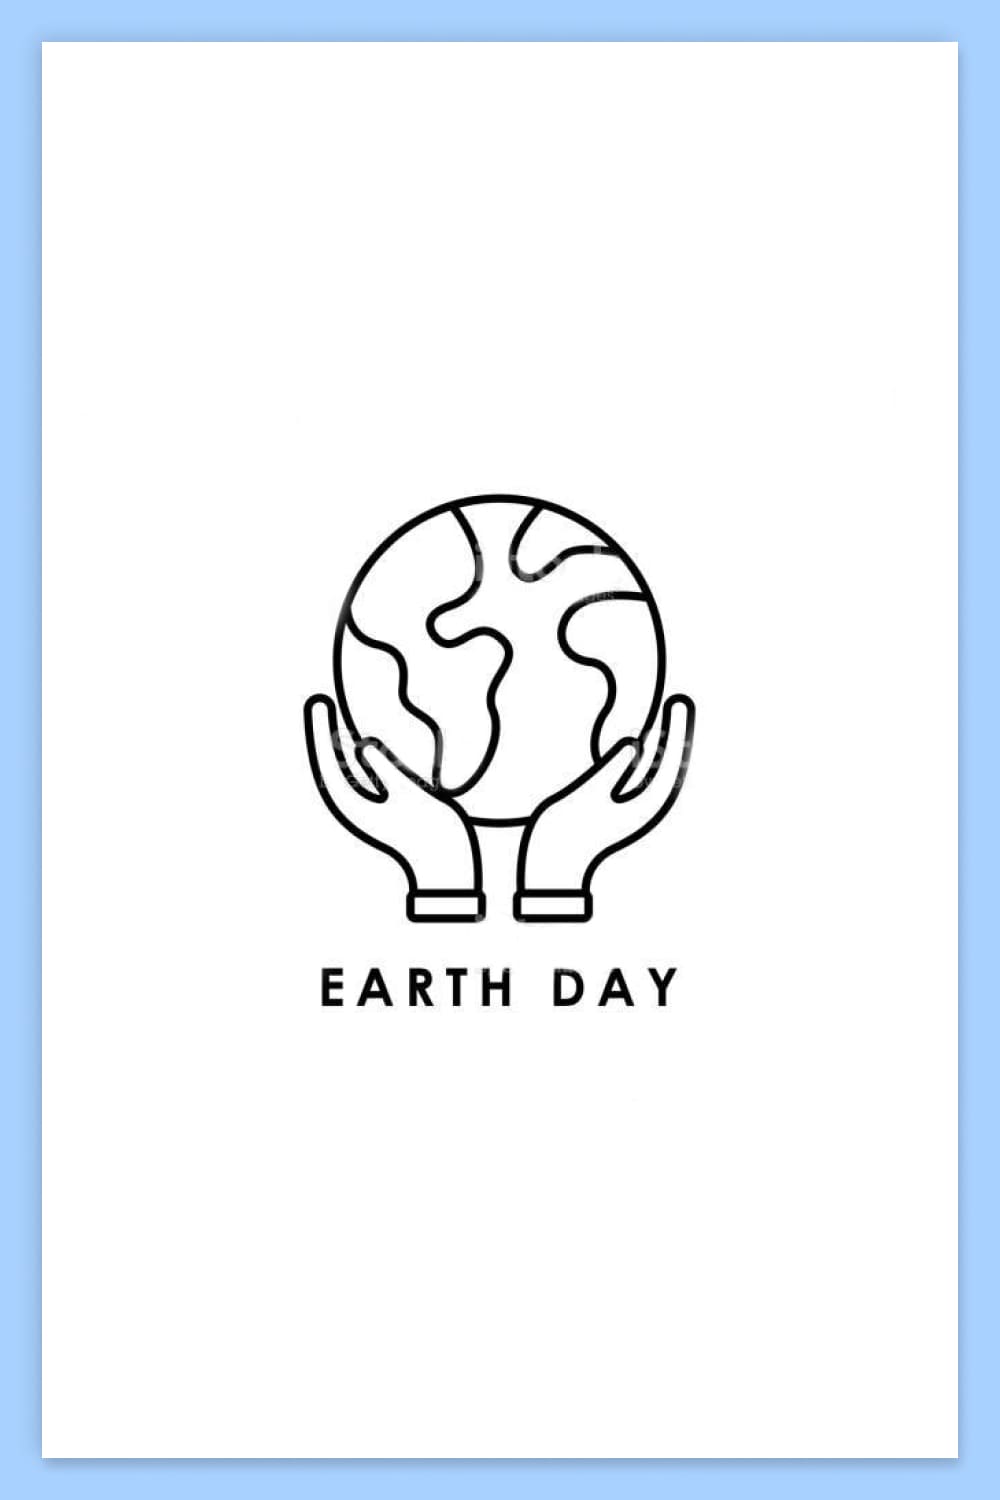 Icon depicting hands holding planet earth.